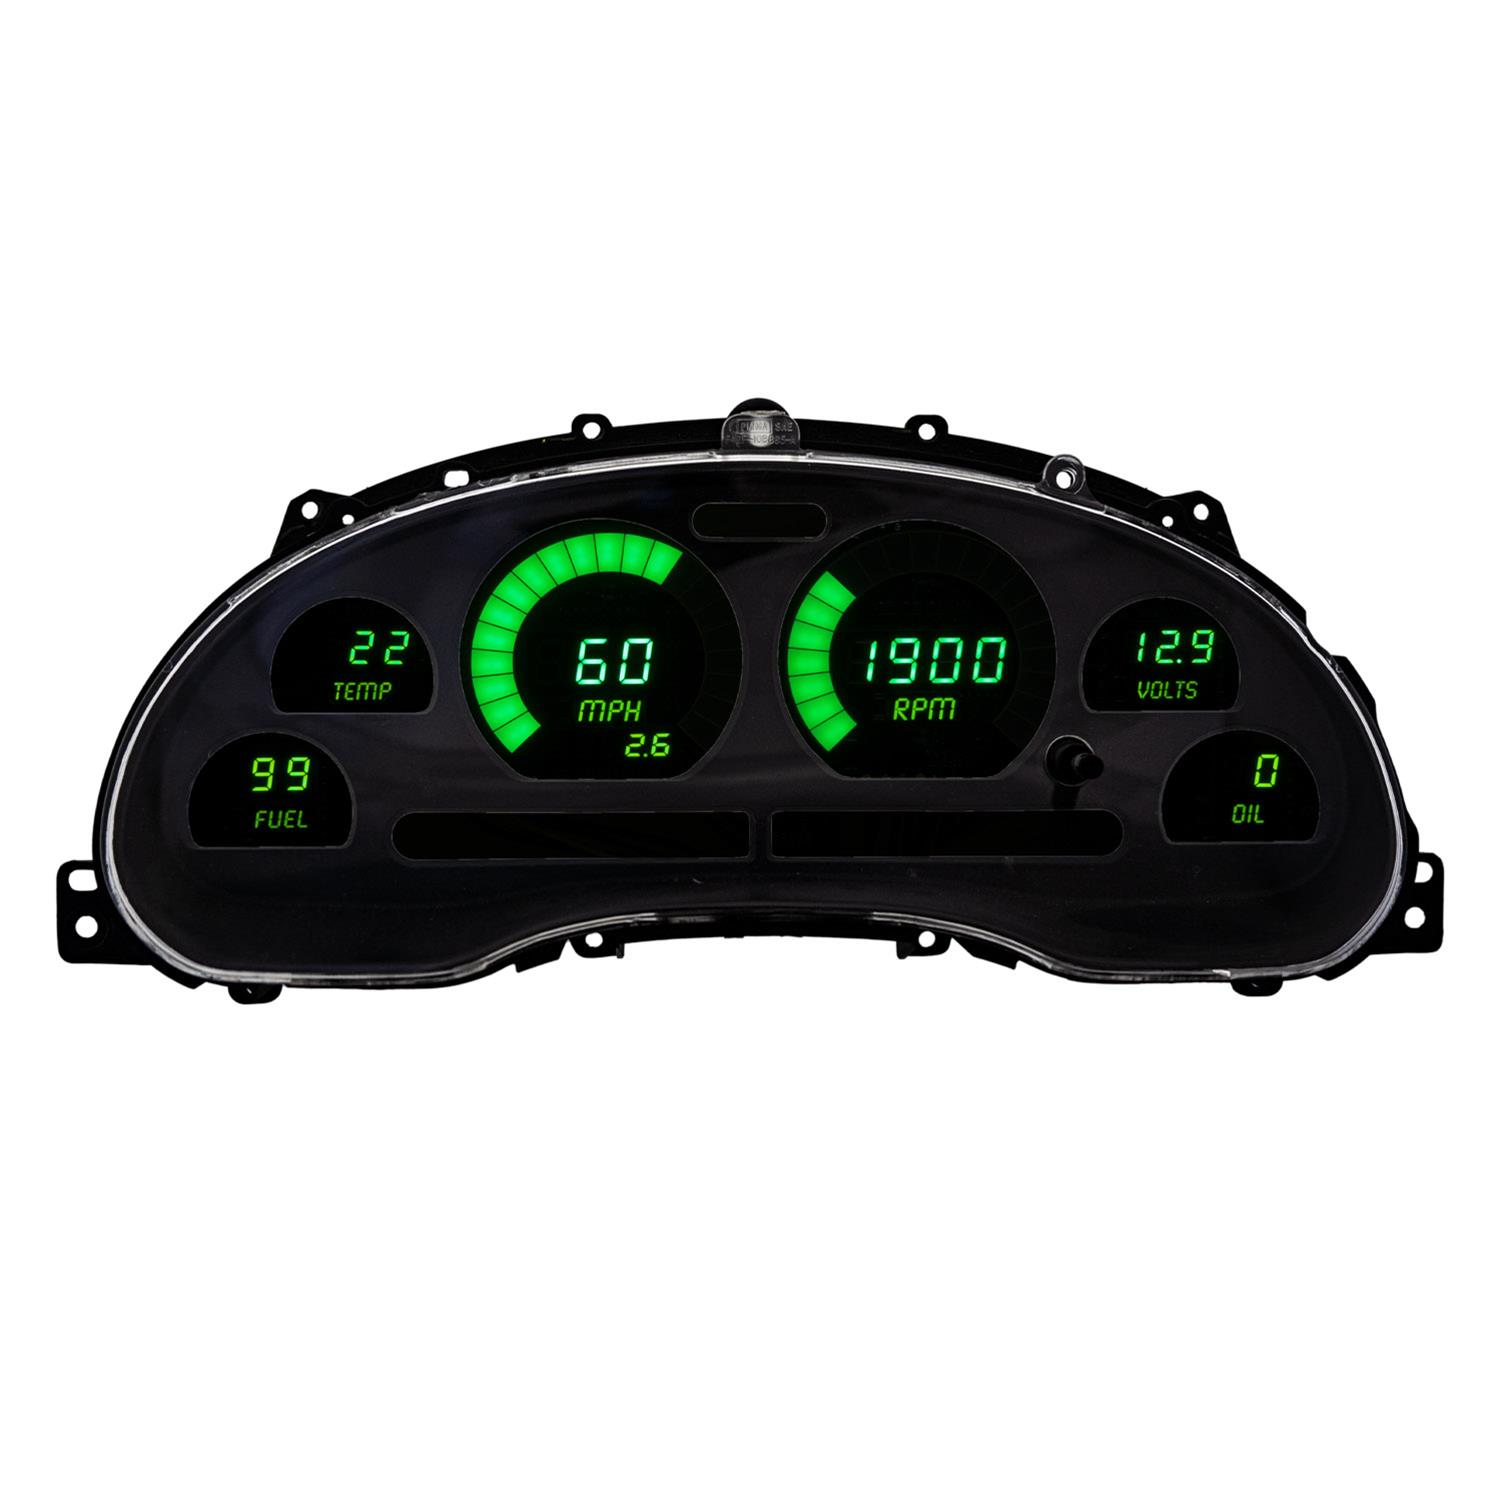 LED Direct Replacement Digital Bargraph Dash Kits for 1994-2004 Ford Mustang [Green]